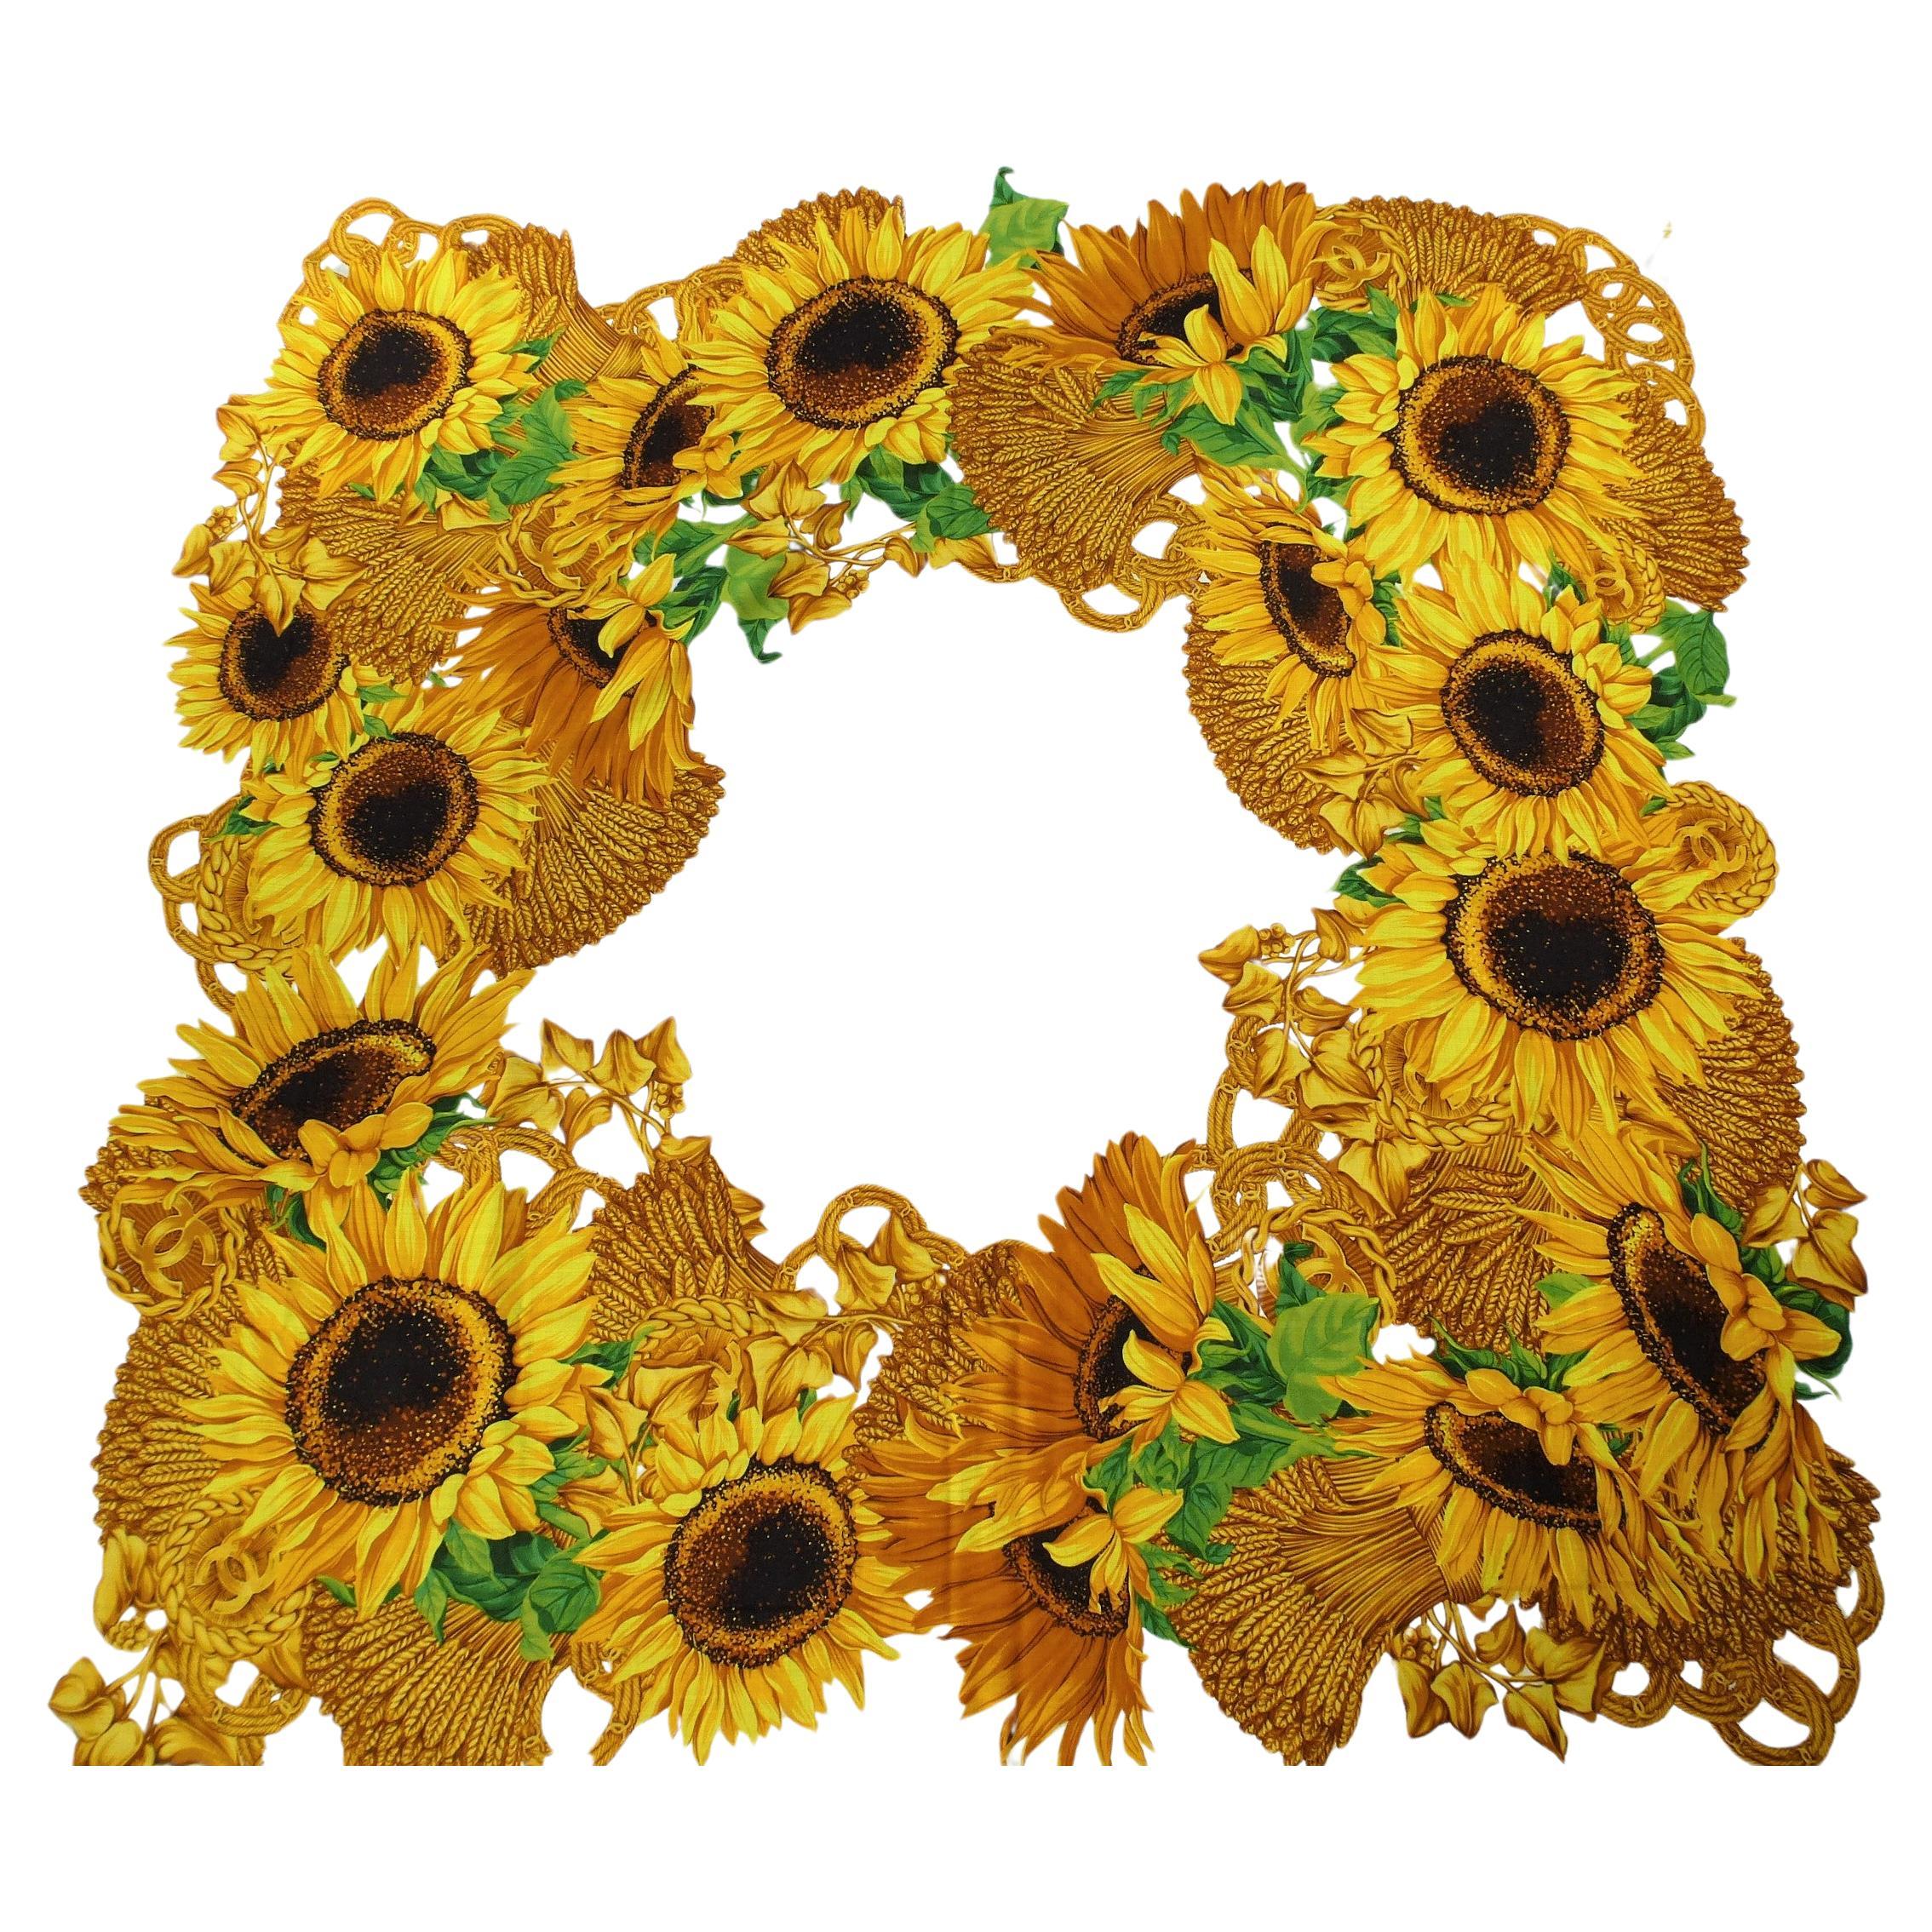 A fine and thin Chanel scarf woven 70 % wool and 30 % silk printed with yellow sunflowers and CC. Sunflowers were also a popular motif for CHANEL. The quality label on this yellow cloth is no langer present. It is the same quality and size as the